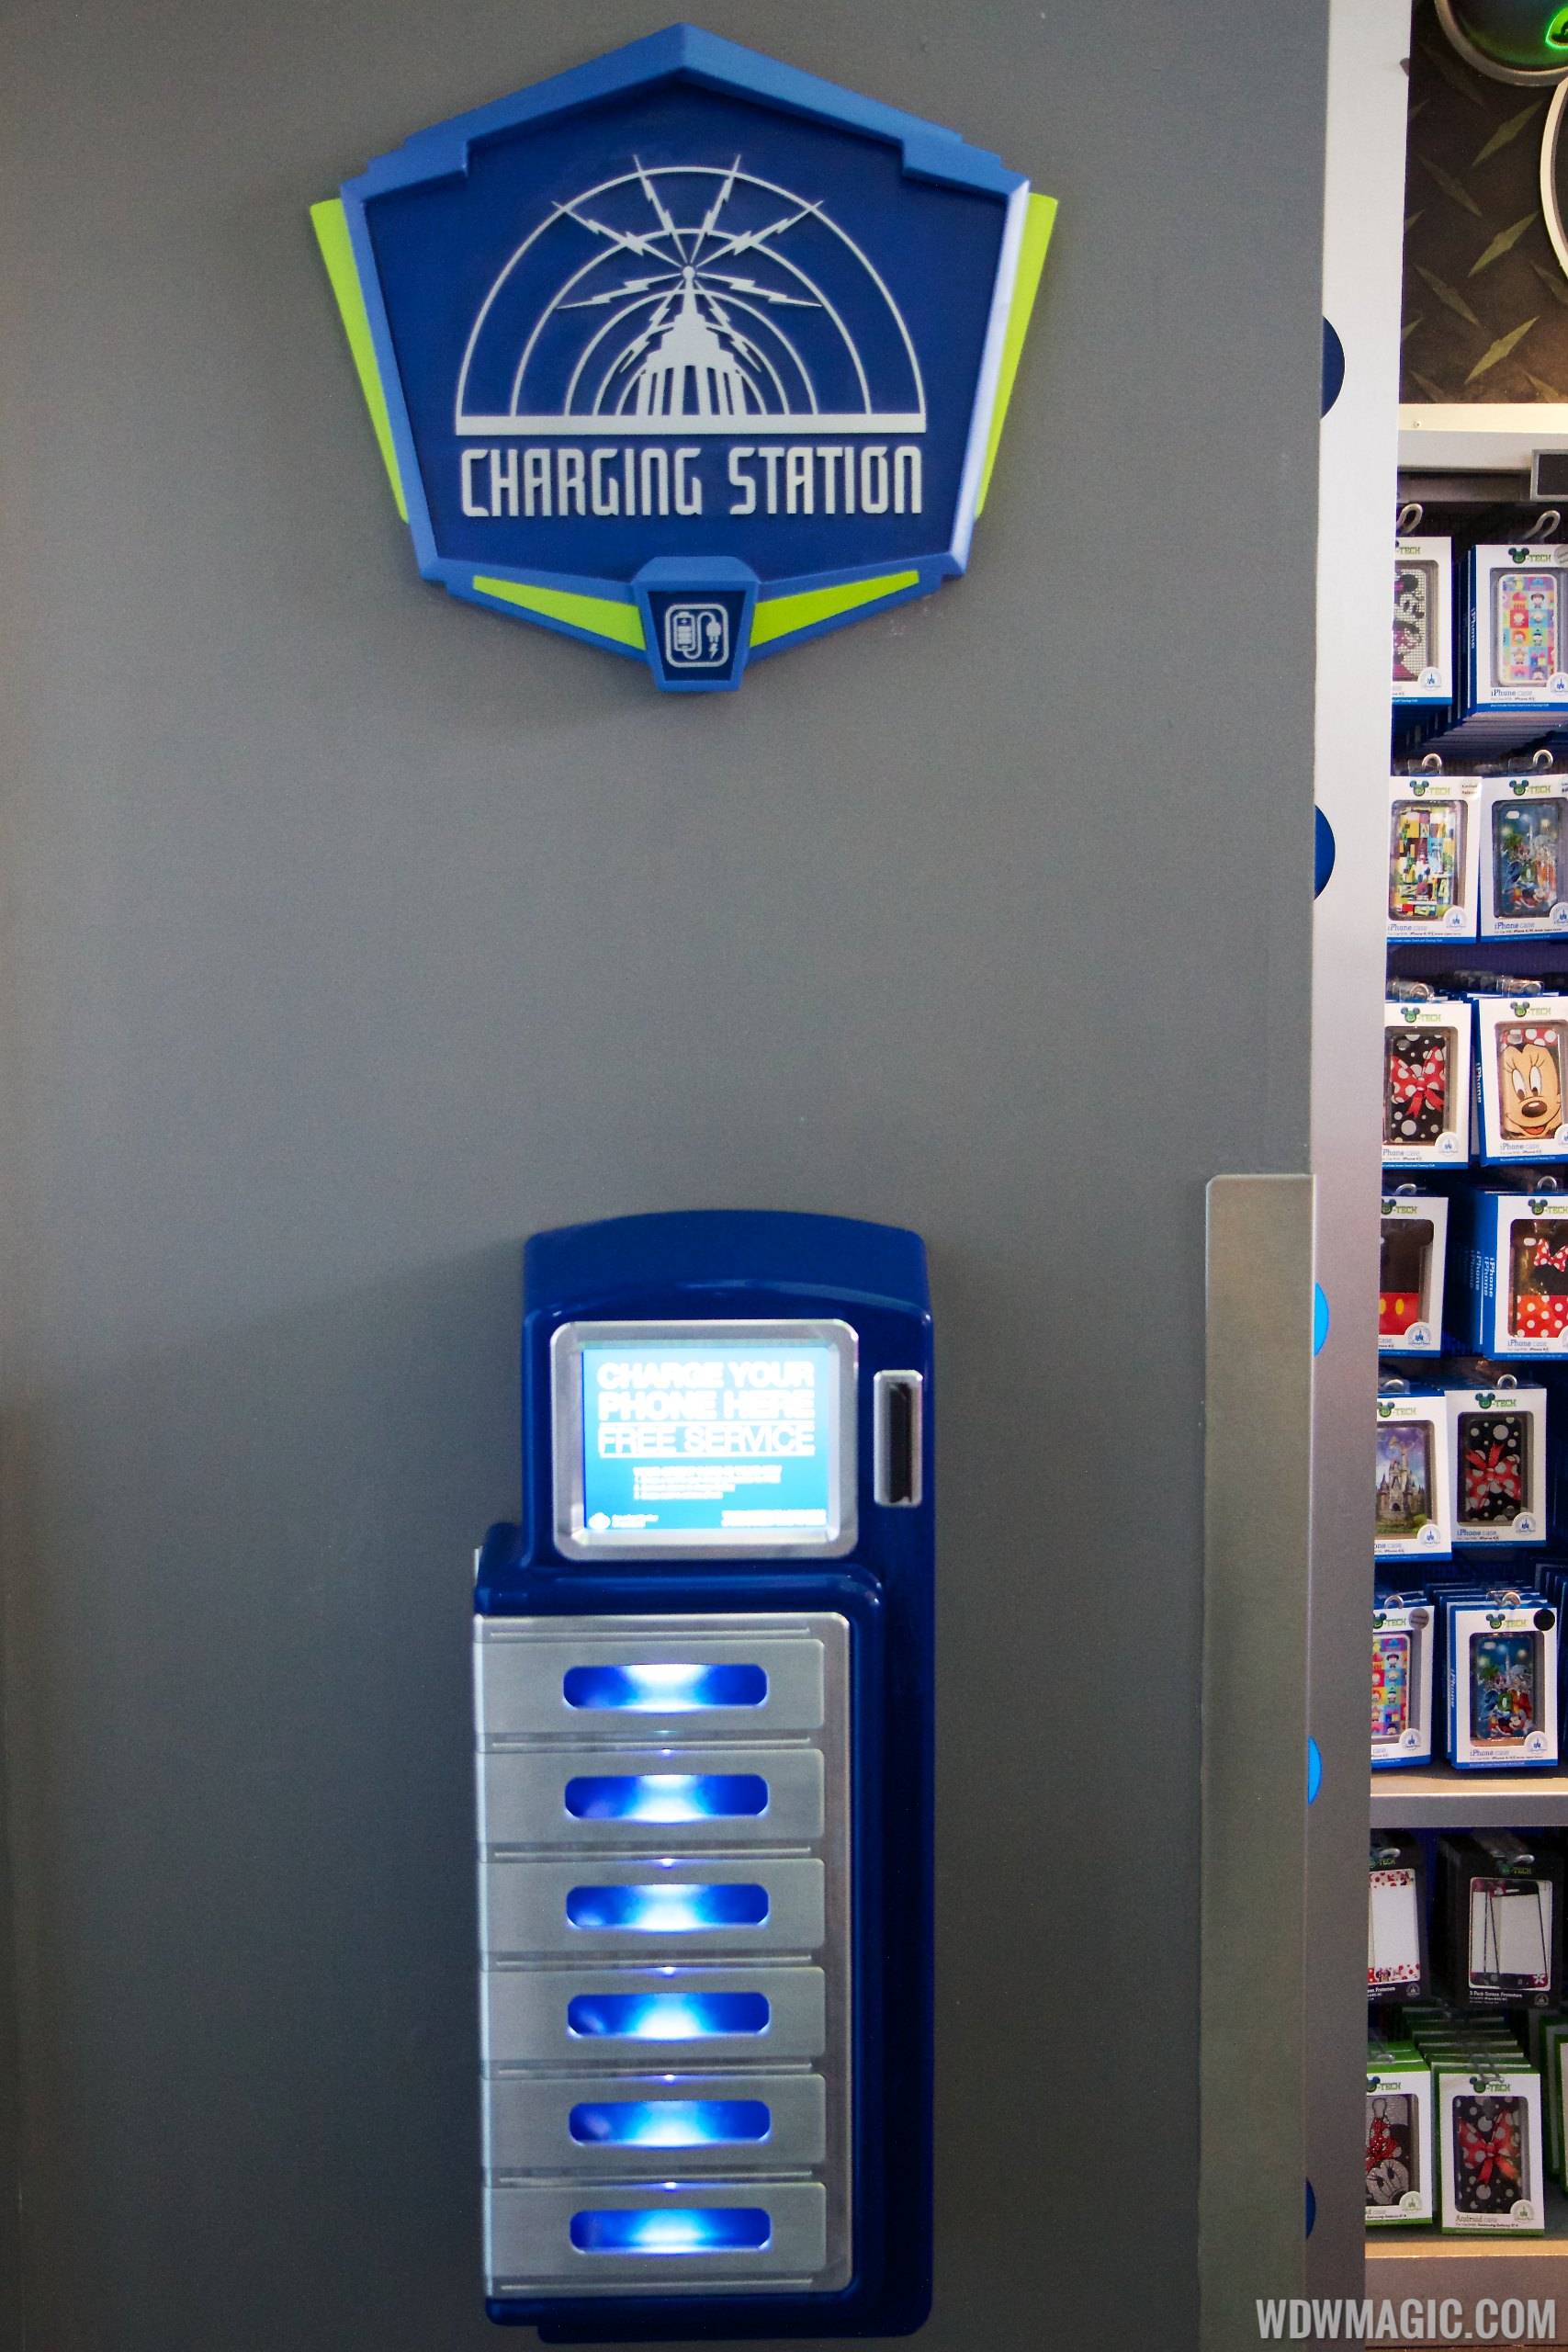 Hands-on with the new smartphone charging lockers at the Magic Kingdom